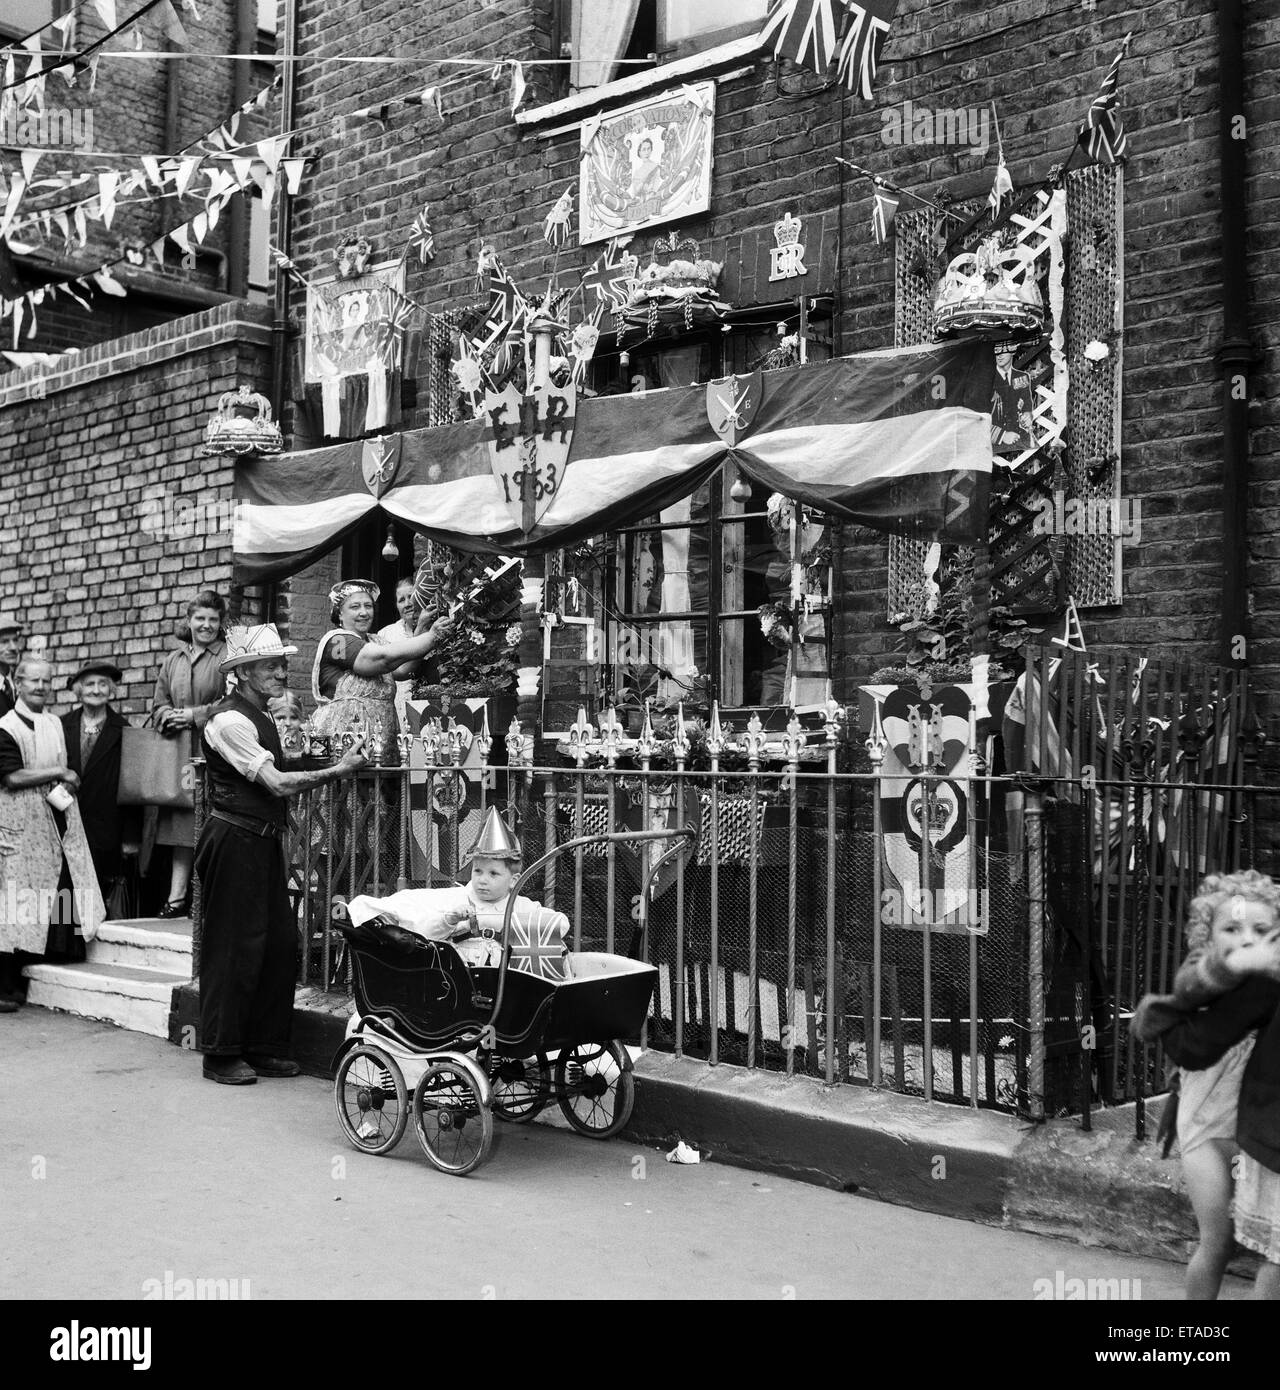 Eight days before Coronation Day, on the Whit Monday bank holiday. Decorations in Finsbury, London. 25th May 1953. Stock Photo